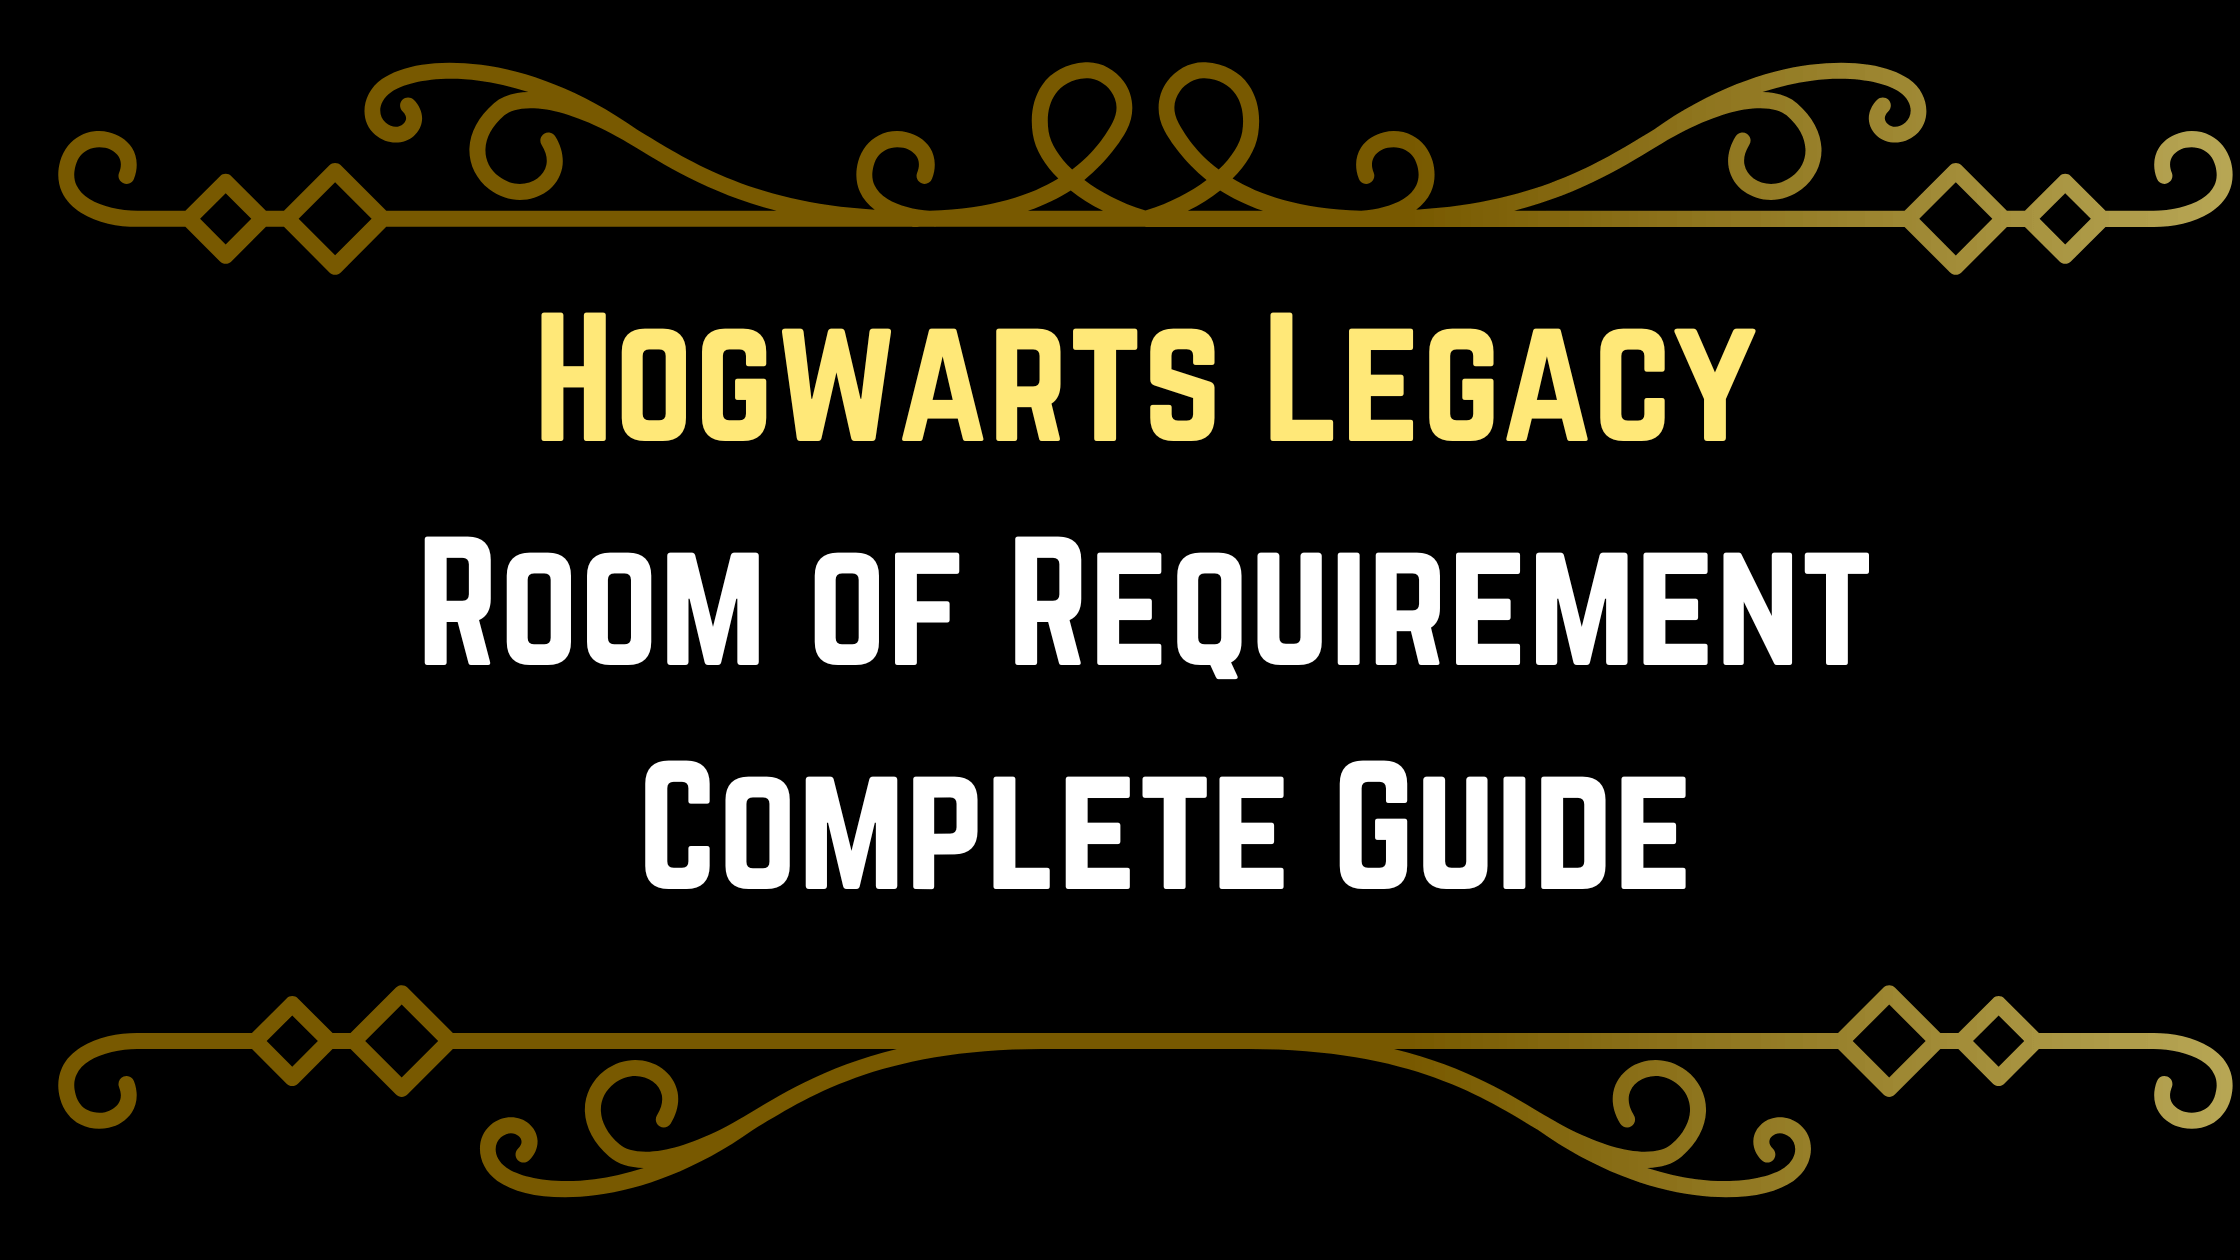 hogwarts legacy room of requirement